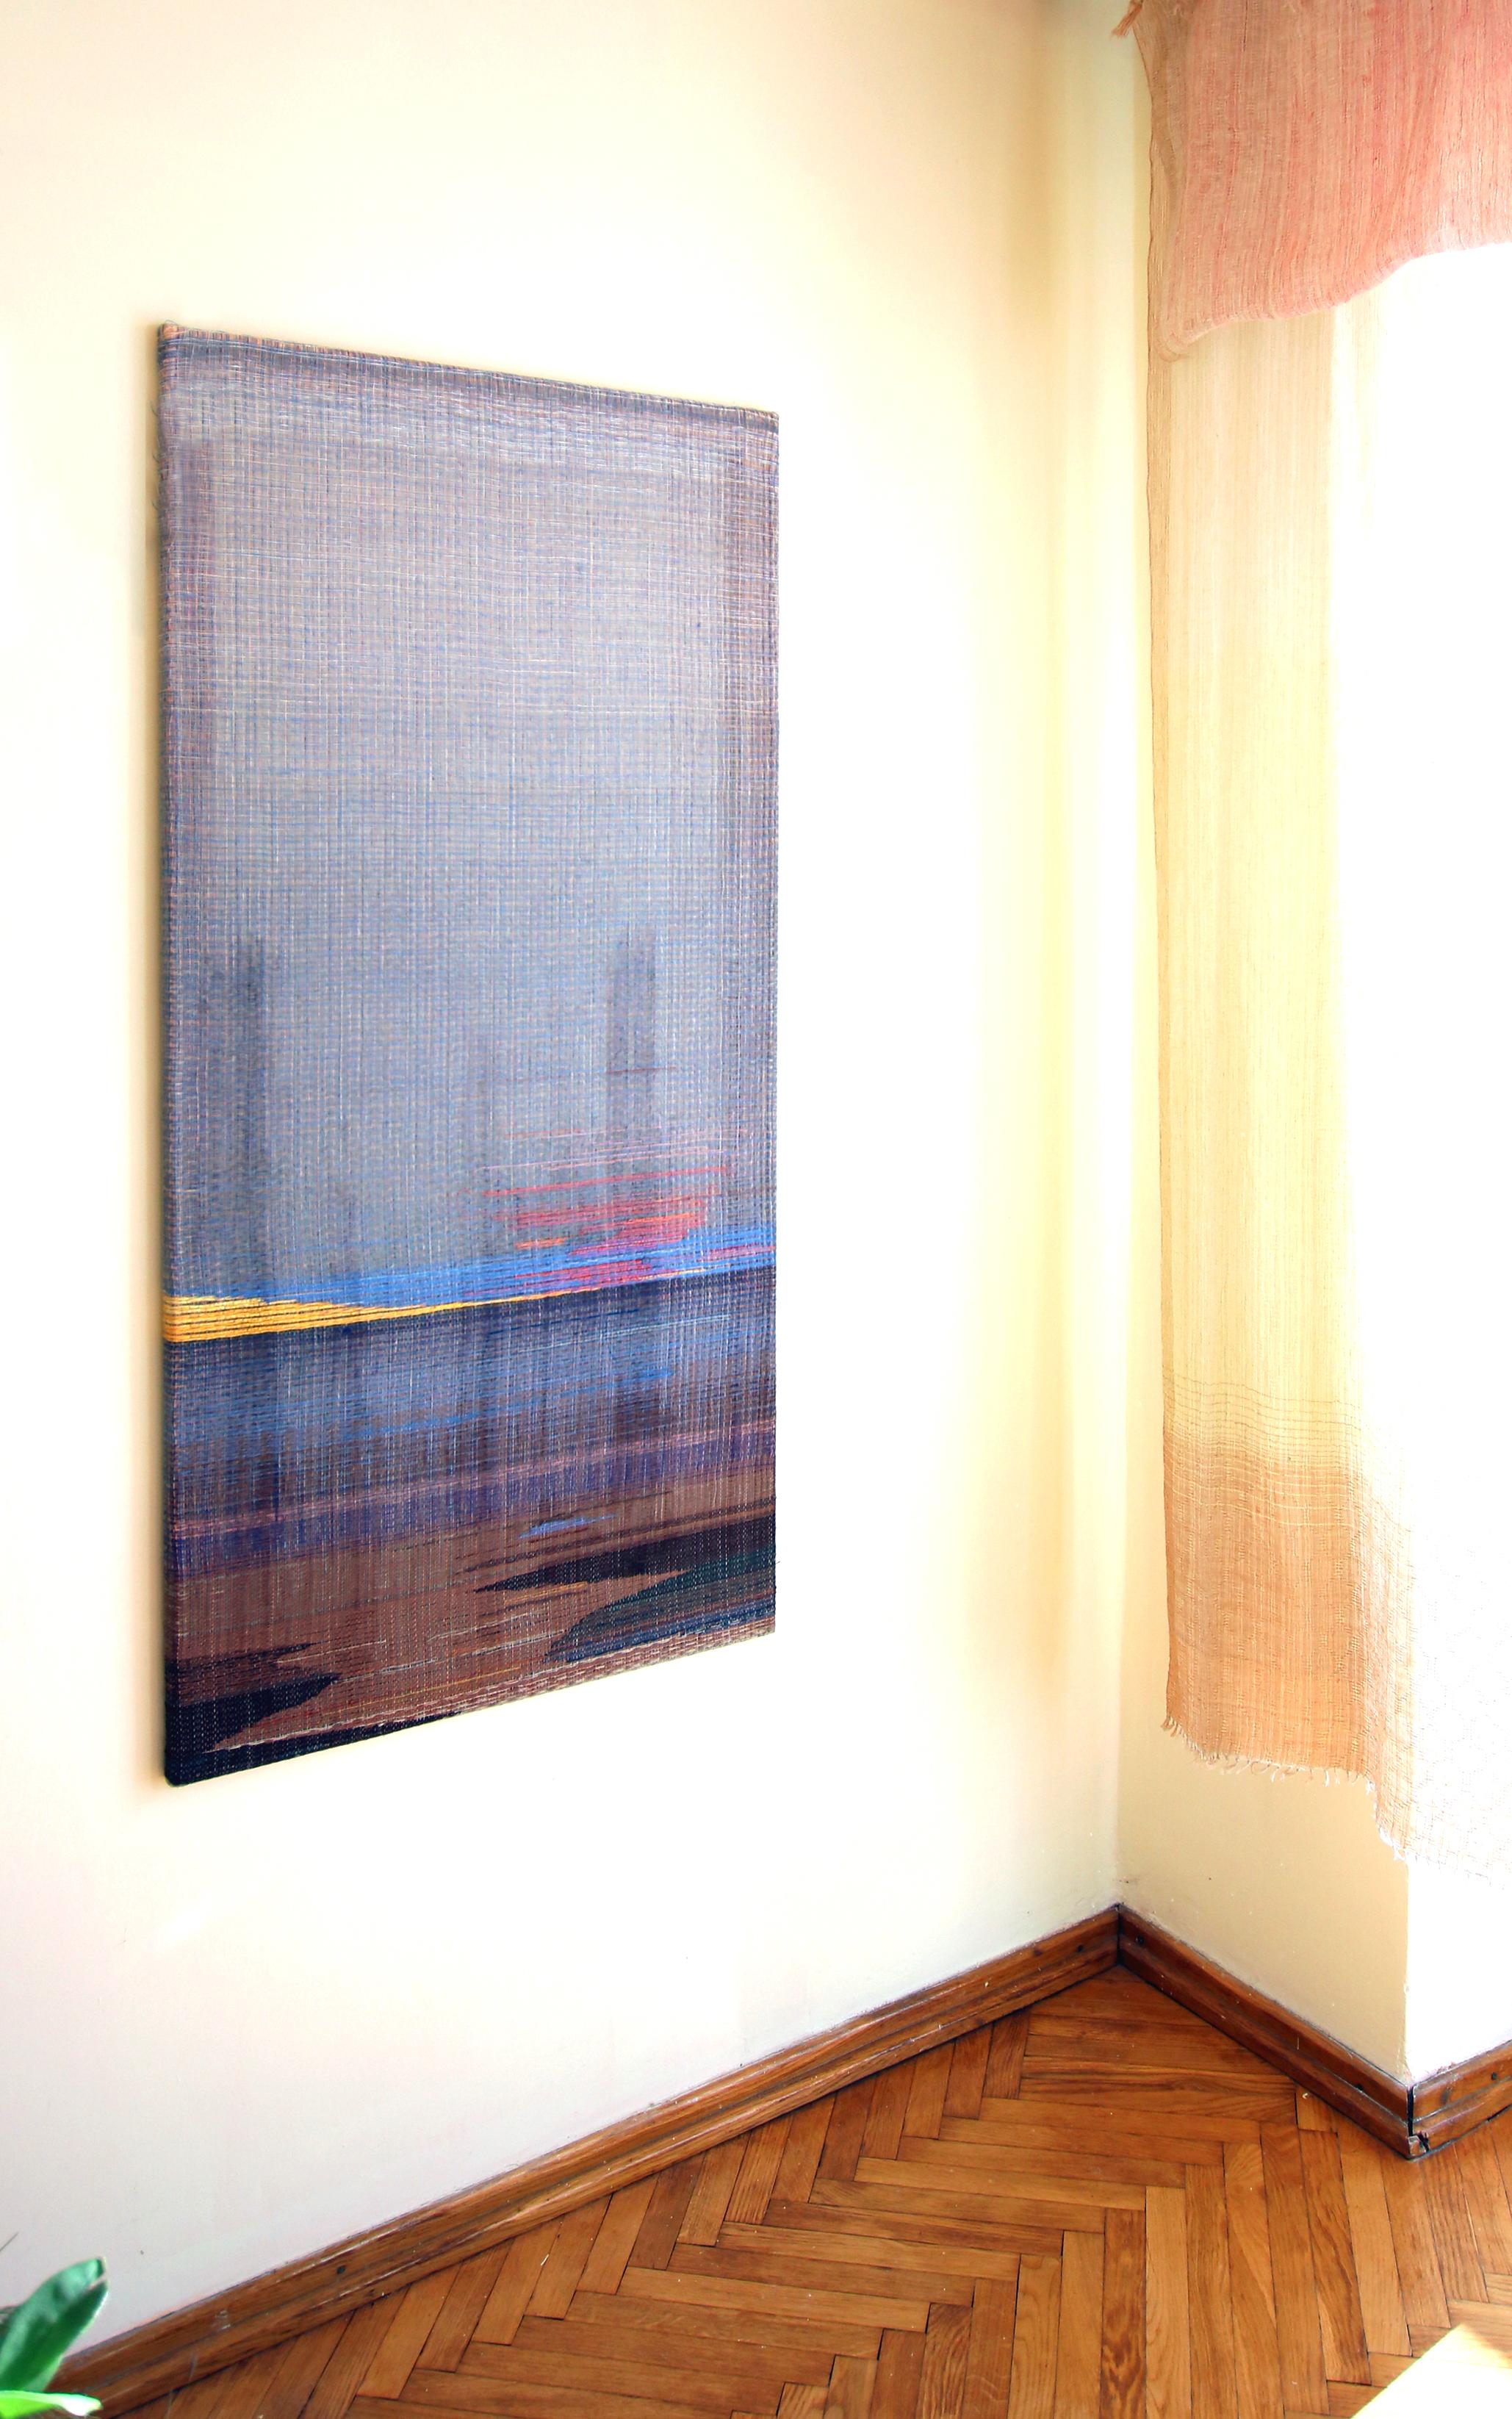 Horizon, Cabo Sardão - Abstract Landscape, Contemporary Painted and Woven Artwork - Painting by Marta Pokojowczyk